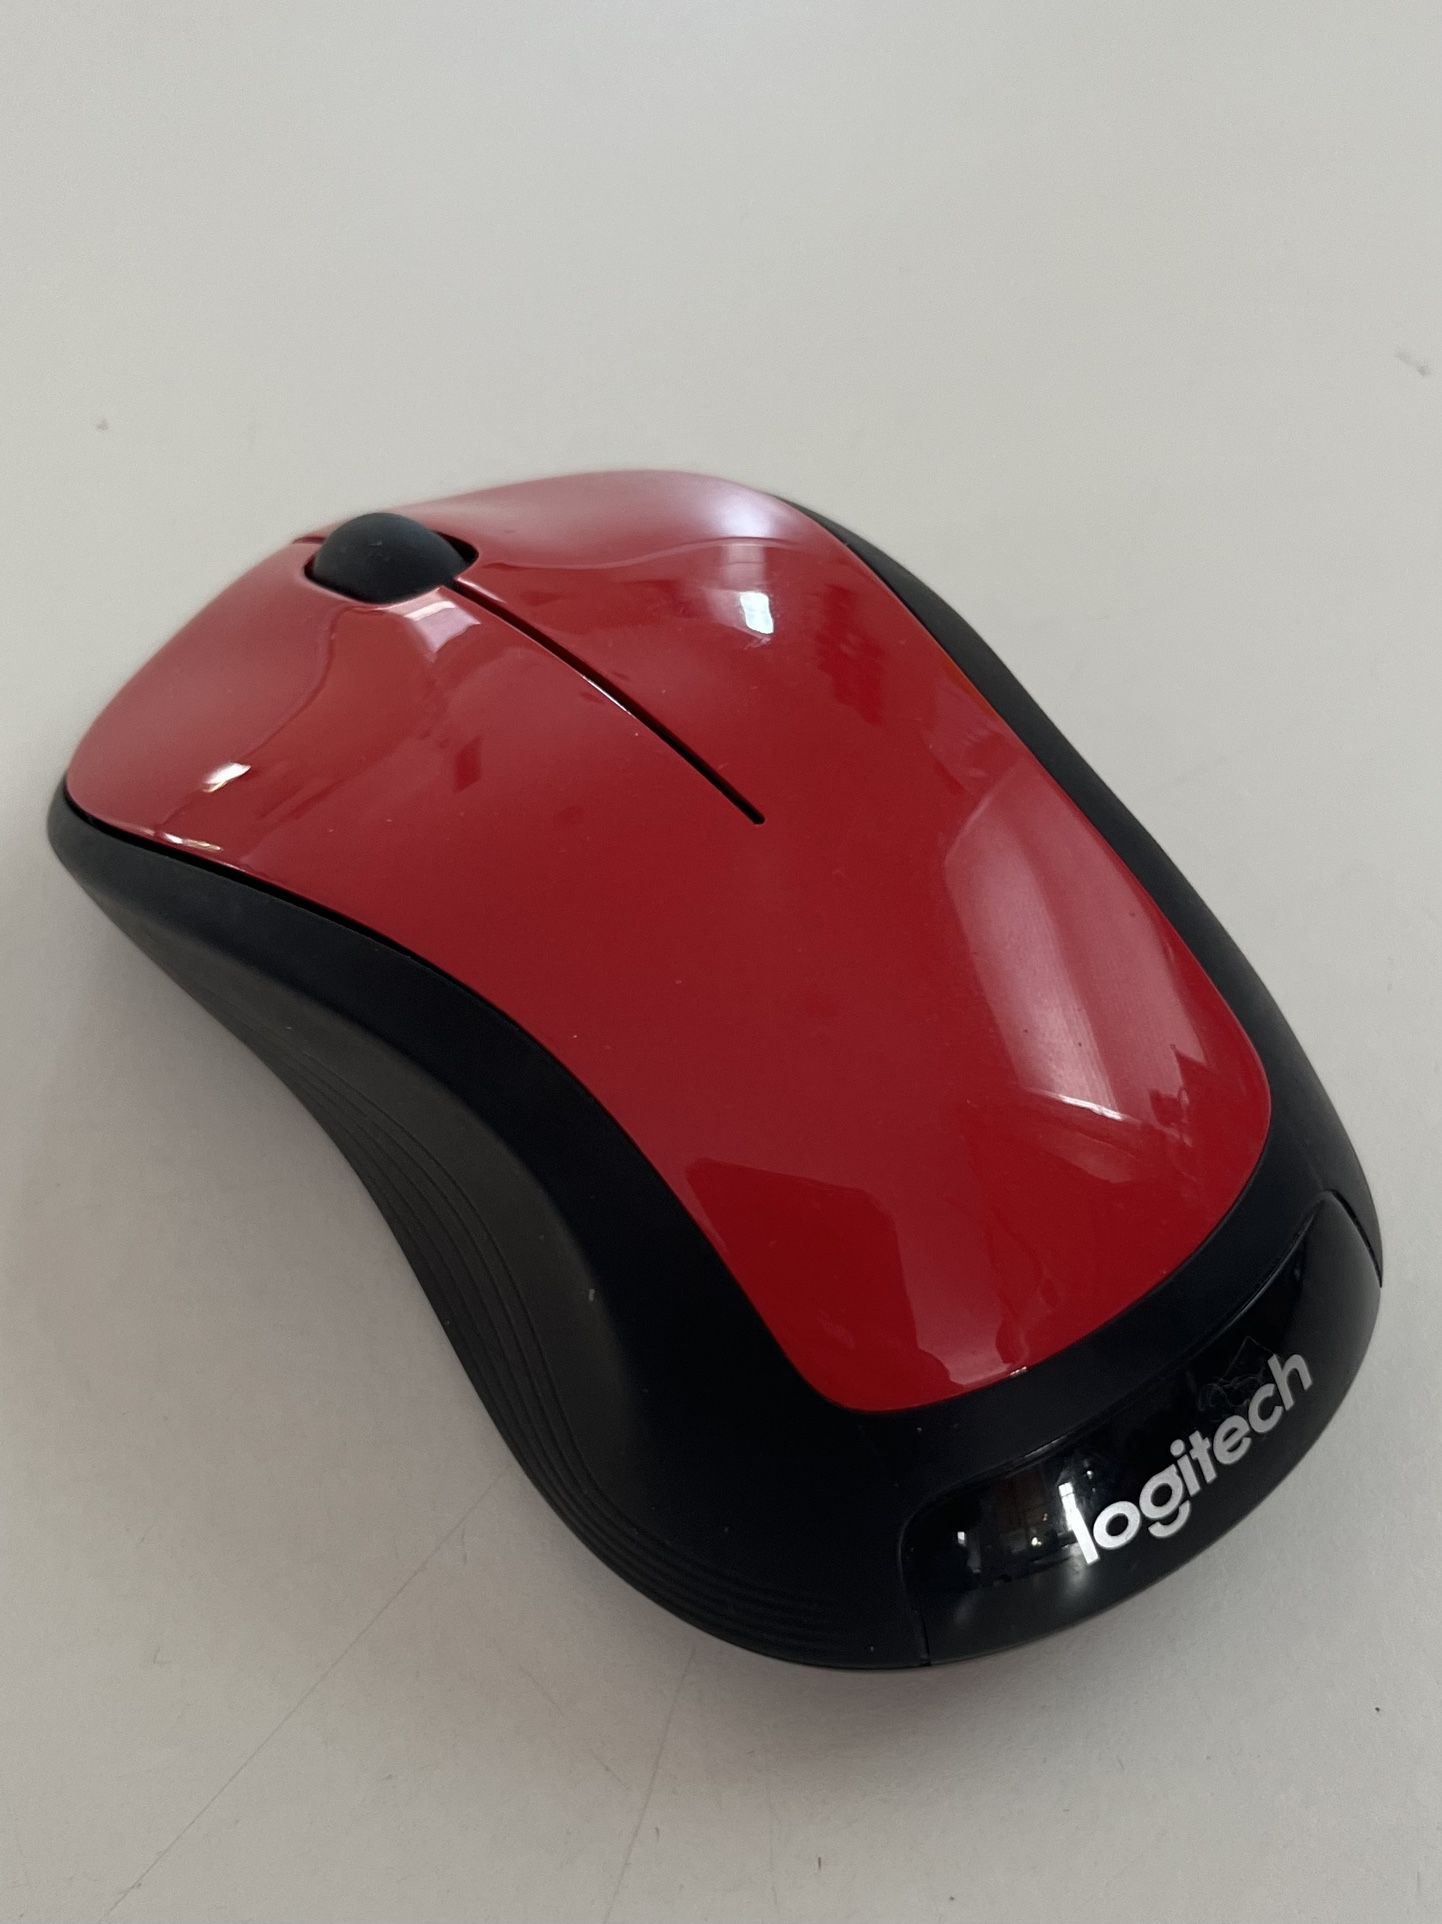 Logitech M310 Wireless Optical Mouse in Flame Red 